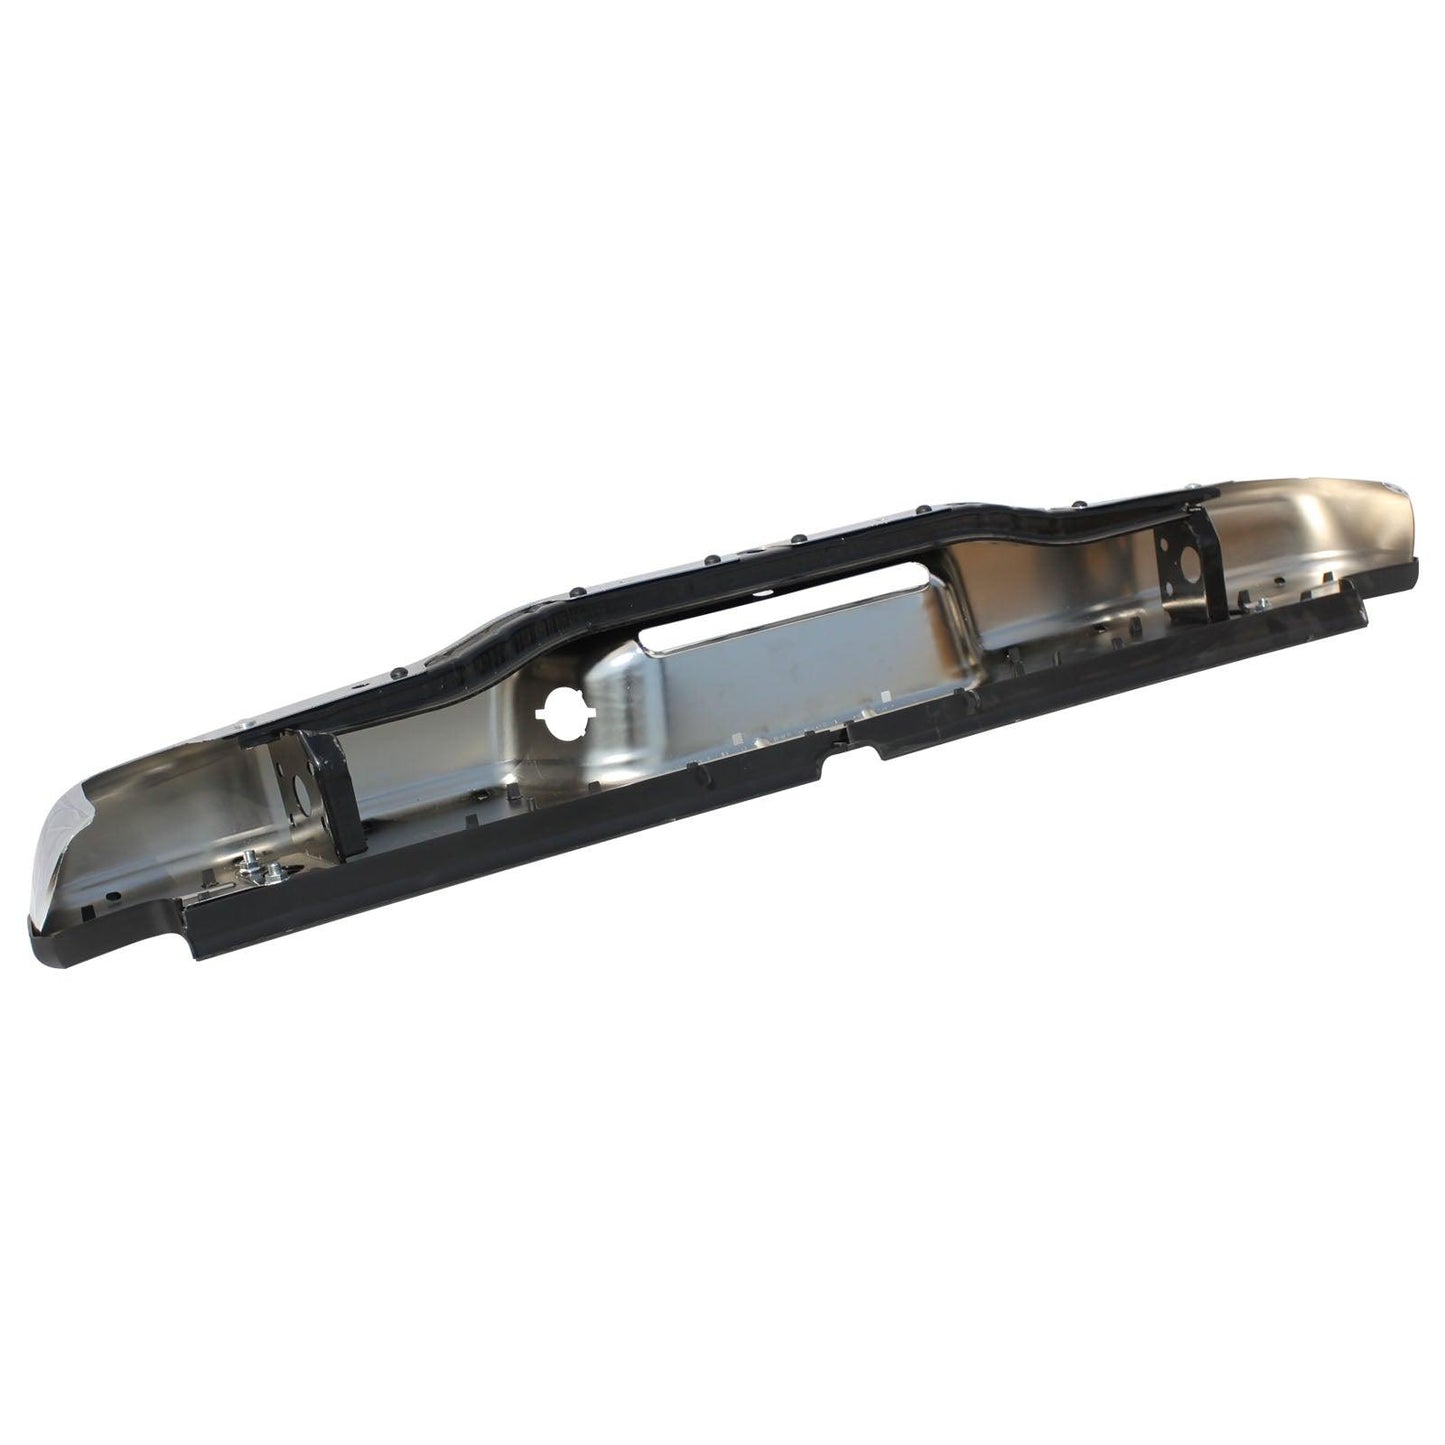 Chrome Rear Steel Bumper Assembly For 1995 1996 1997 1998 1999 2000 2001 2002 2003 2004 Toyota Tacoma - trucfri